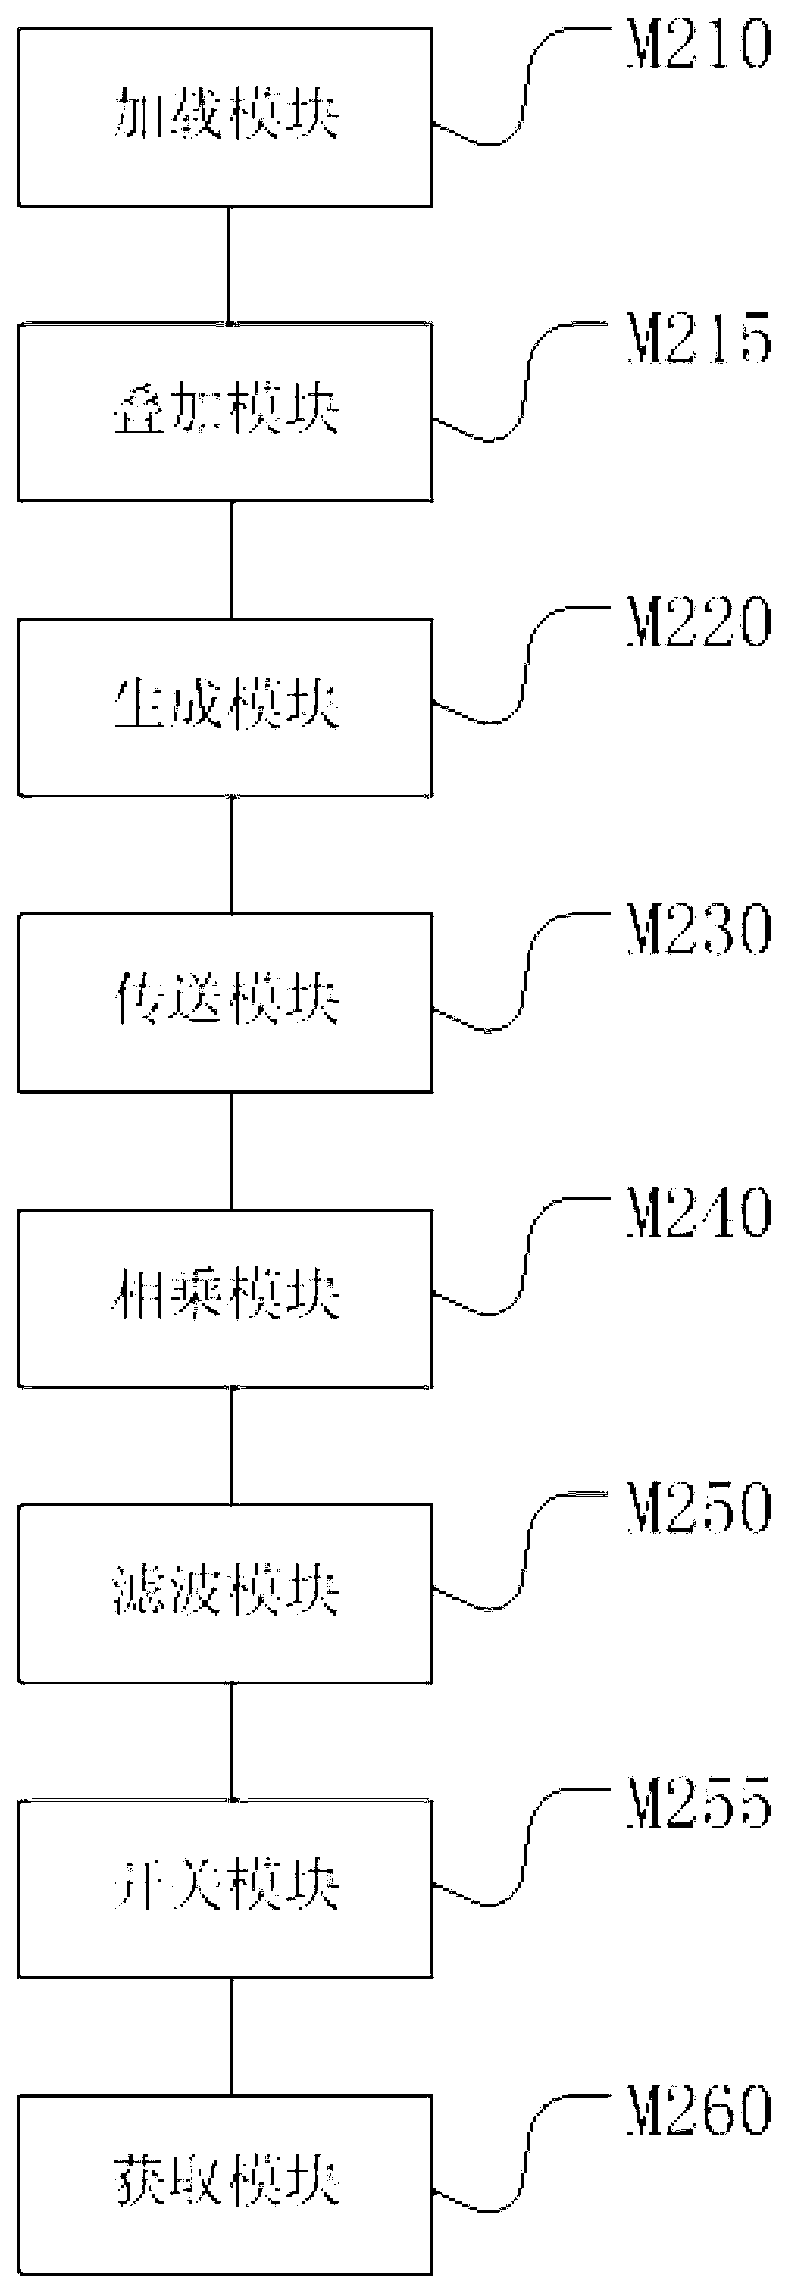 Synchronous multi-frequency impedance measurement method and device